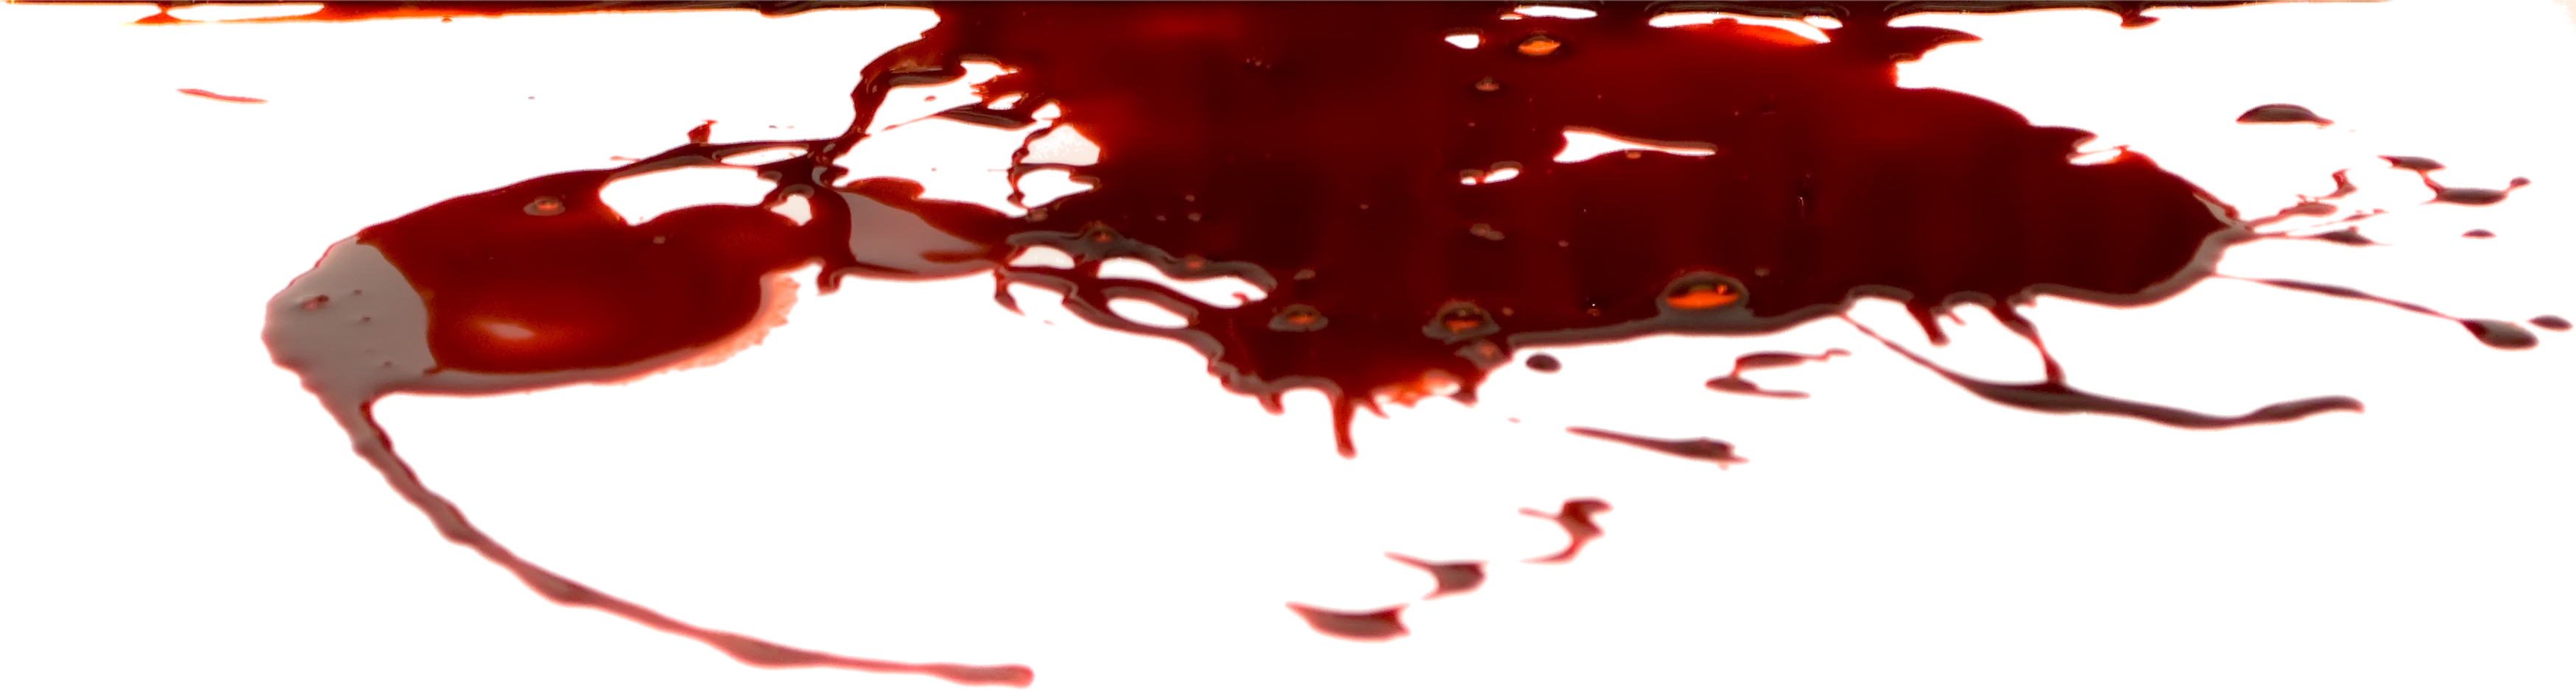 Download PNG image - Blood PNG Pic 